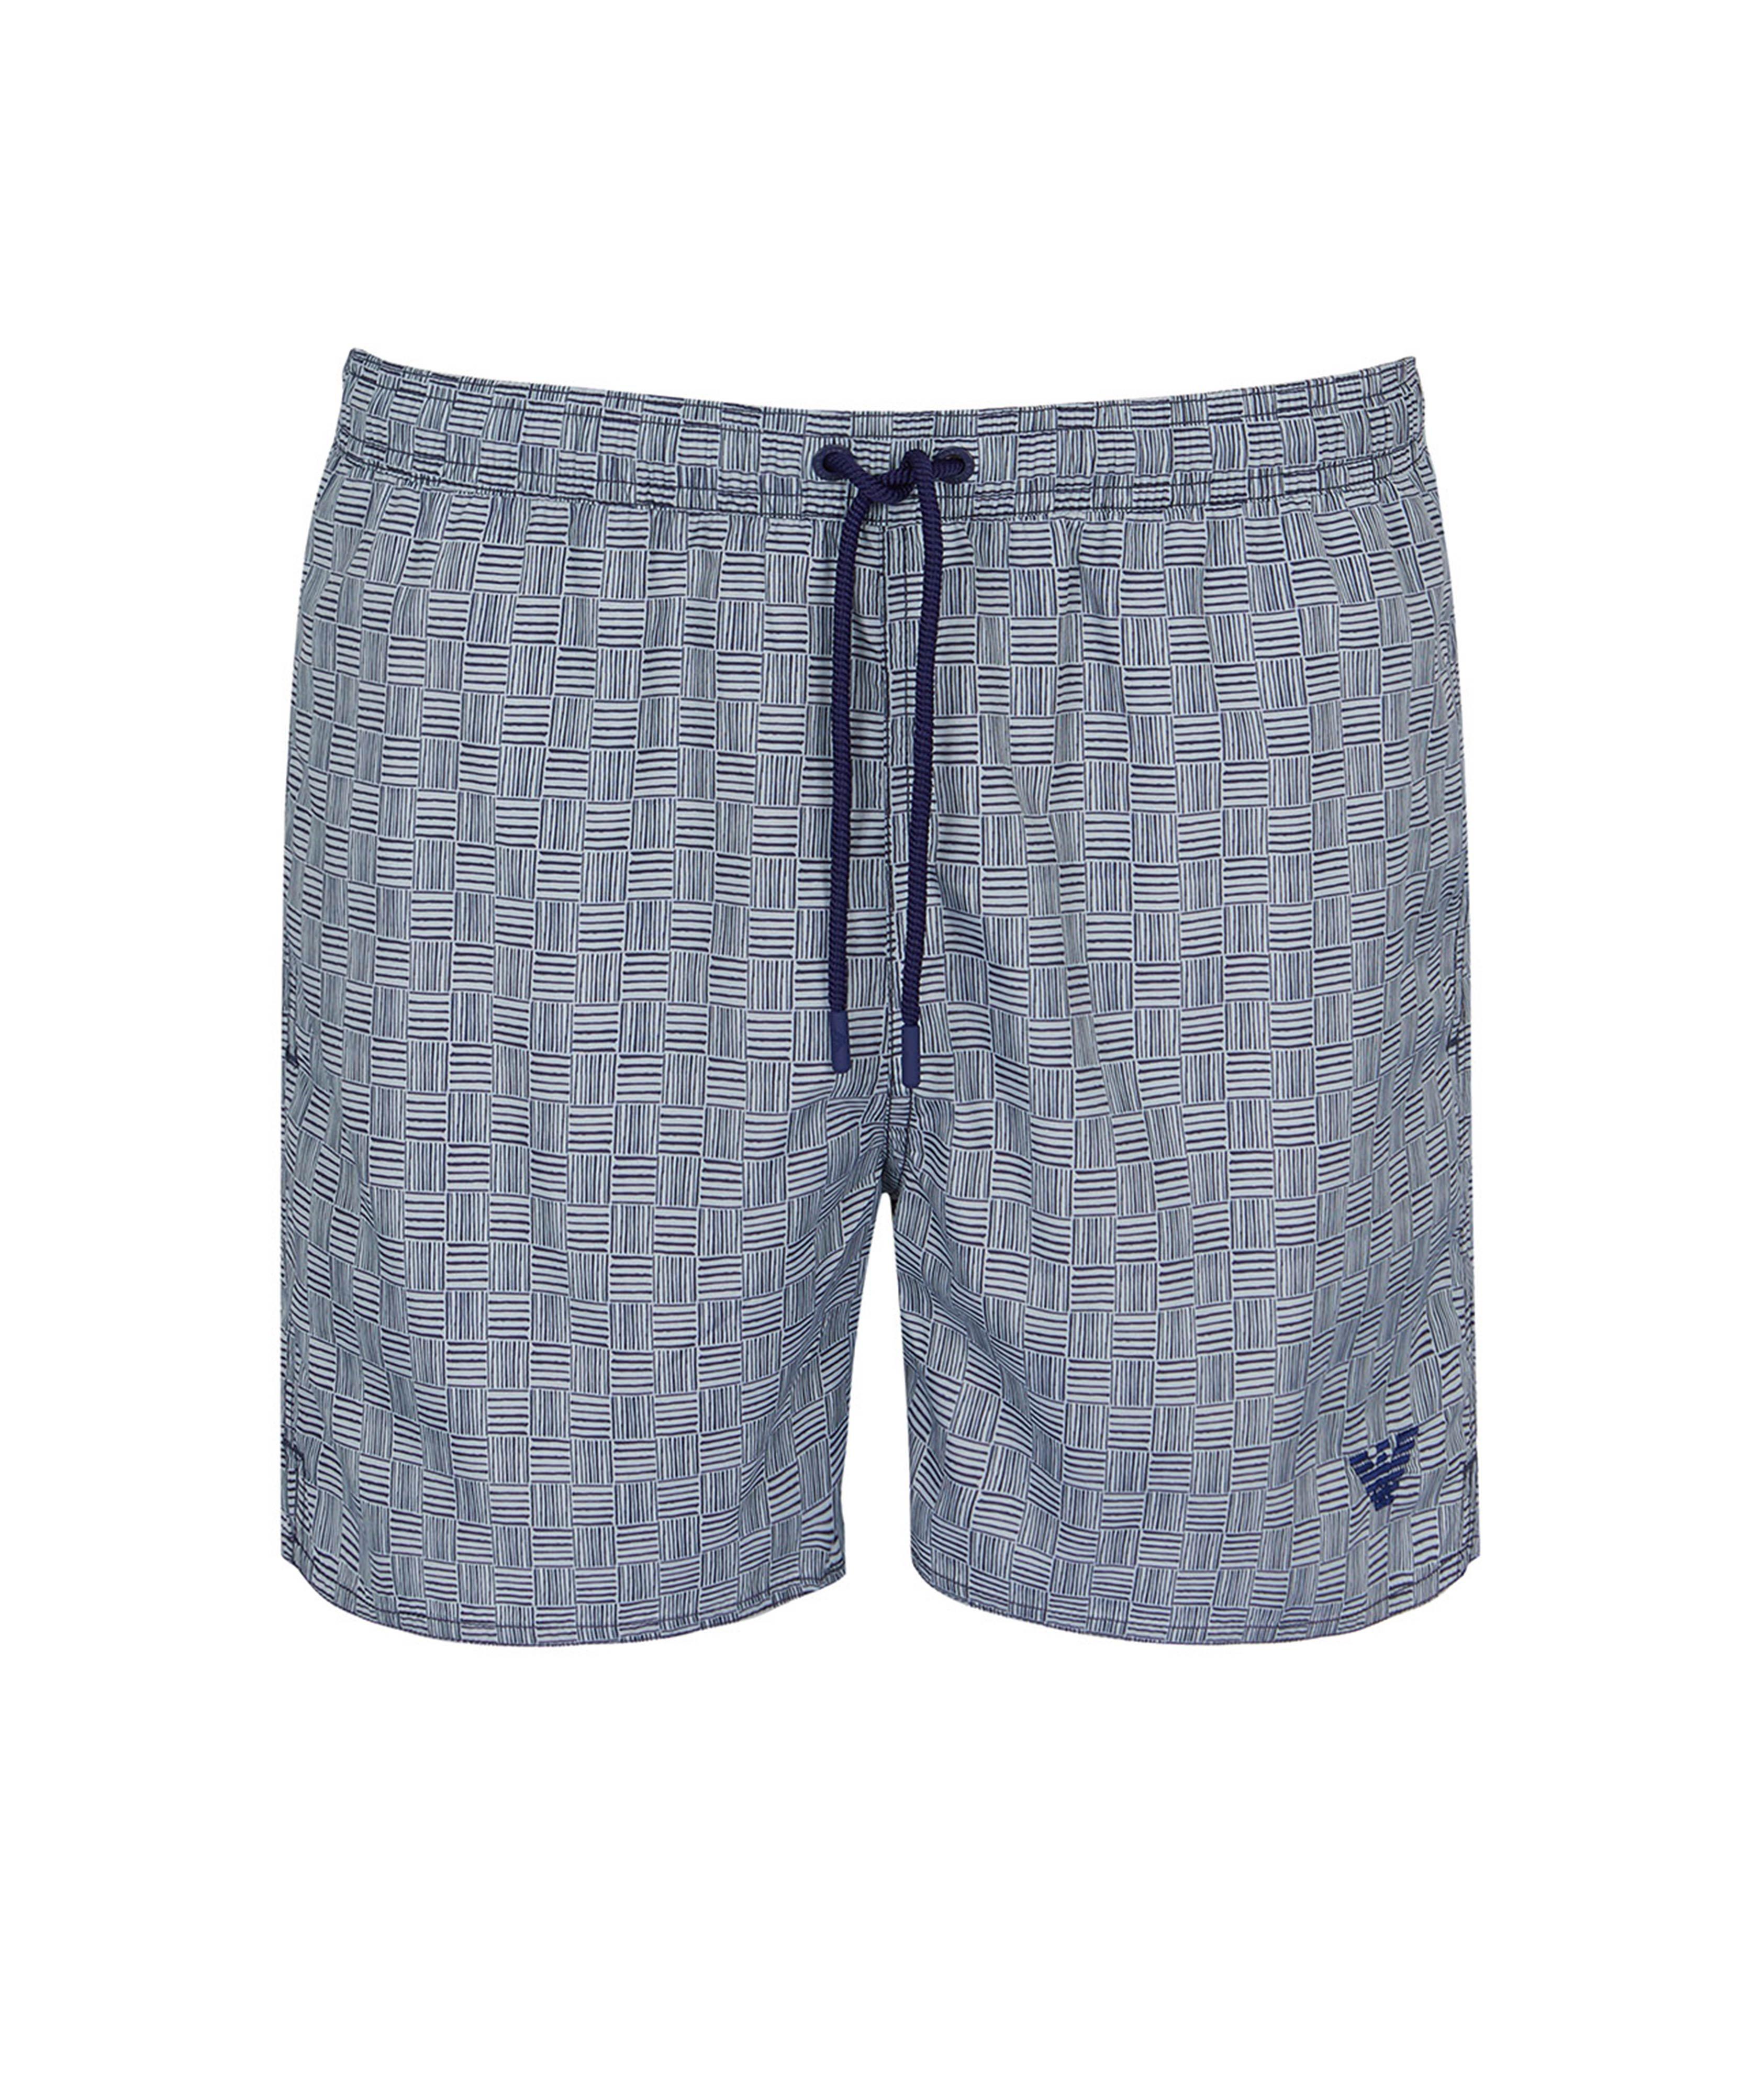 Swim Trunks with Bamboo Pattern image 0